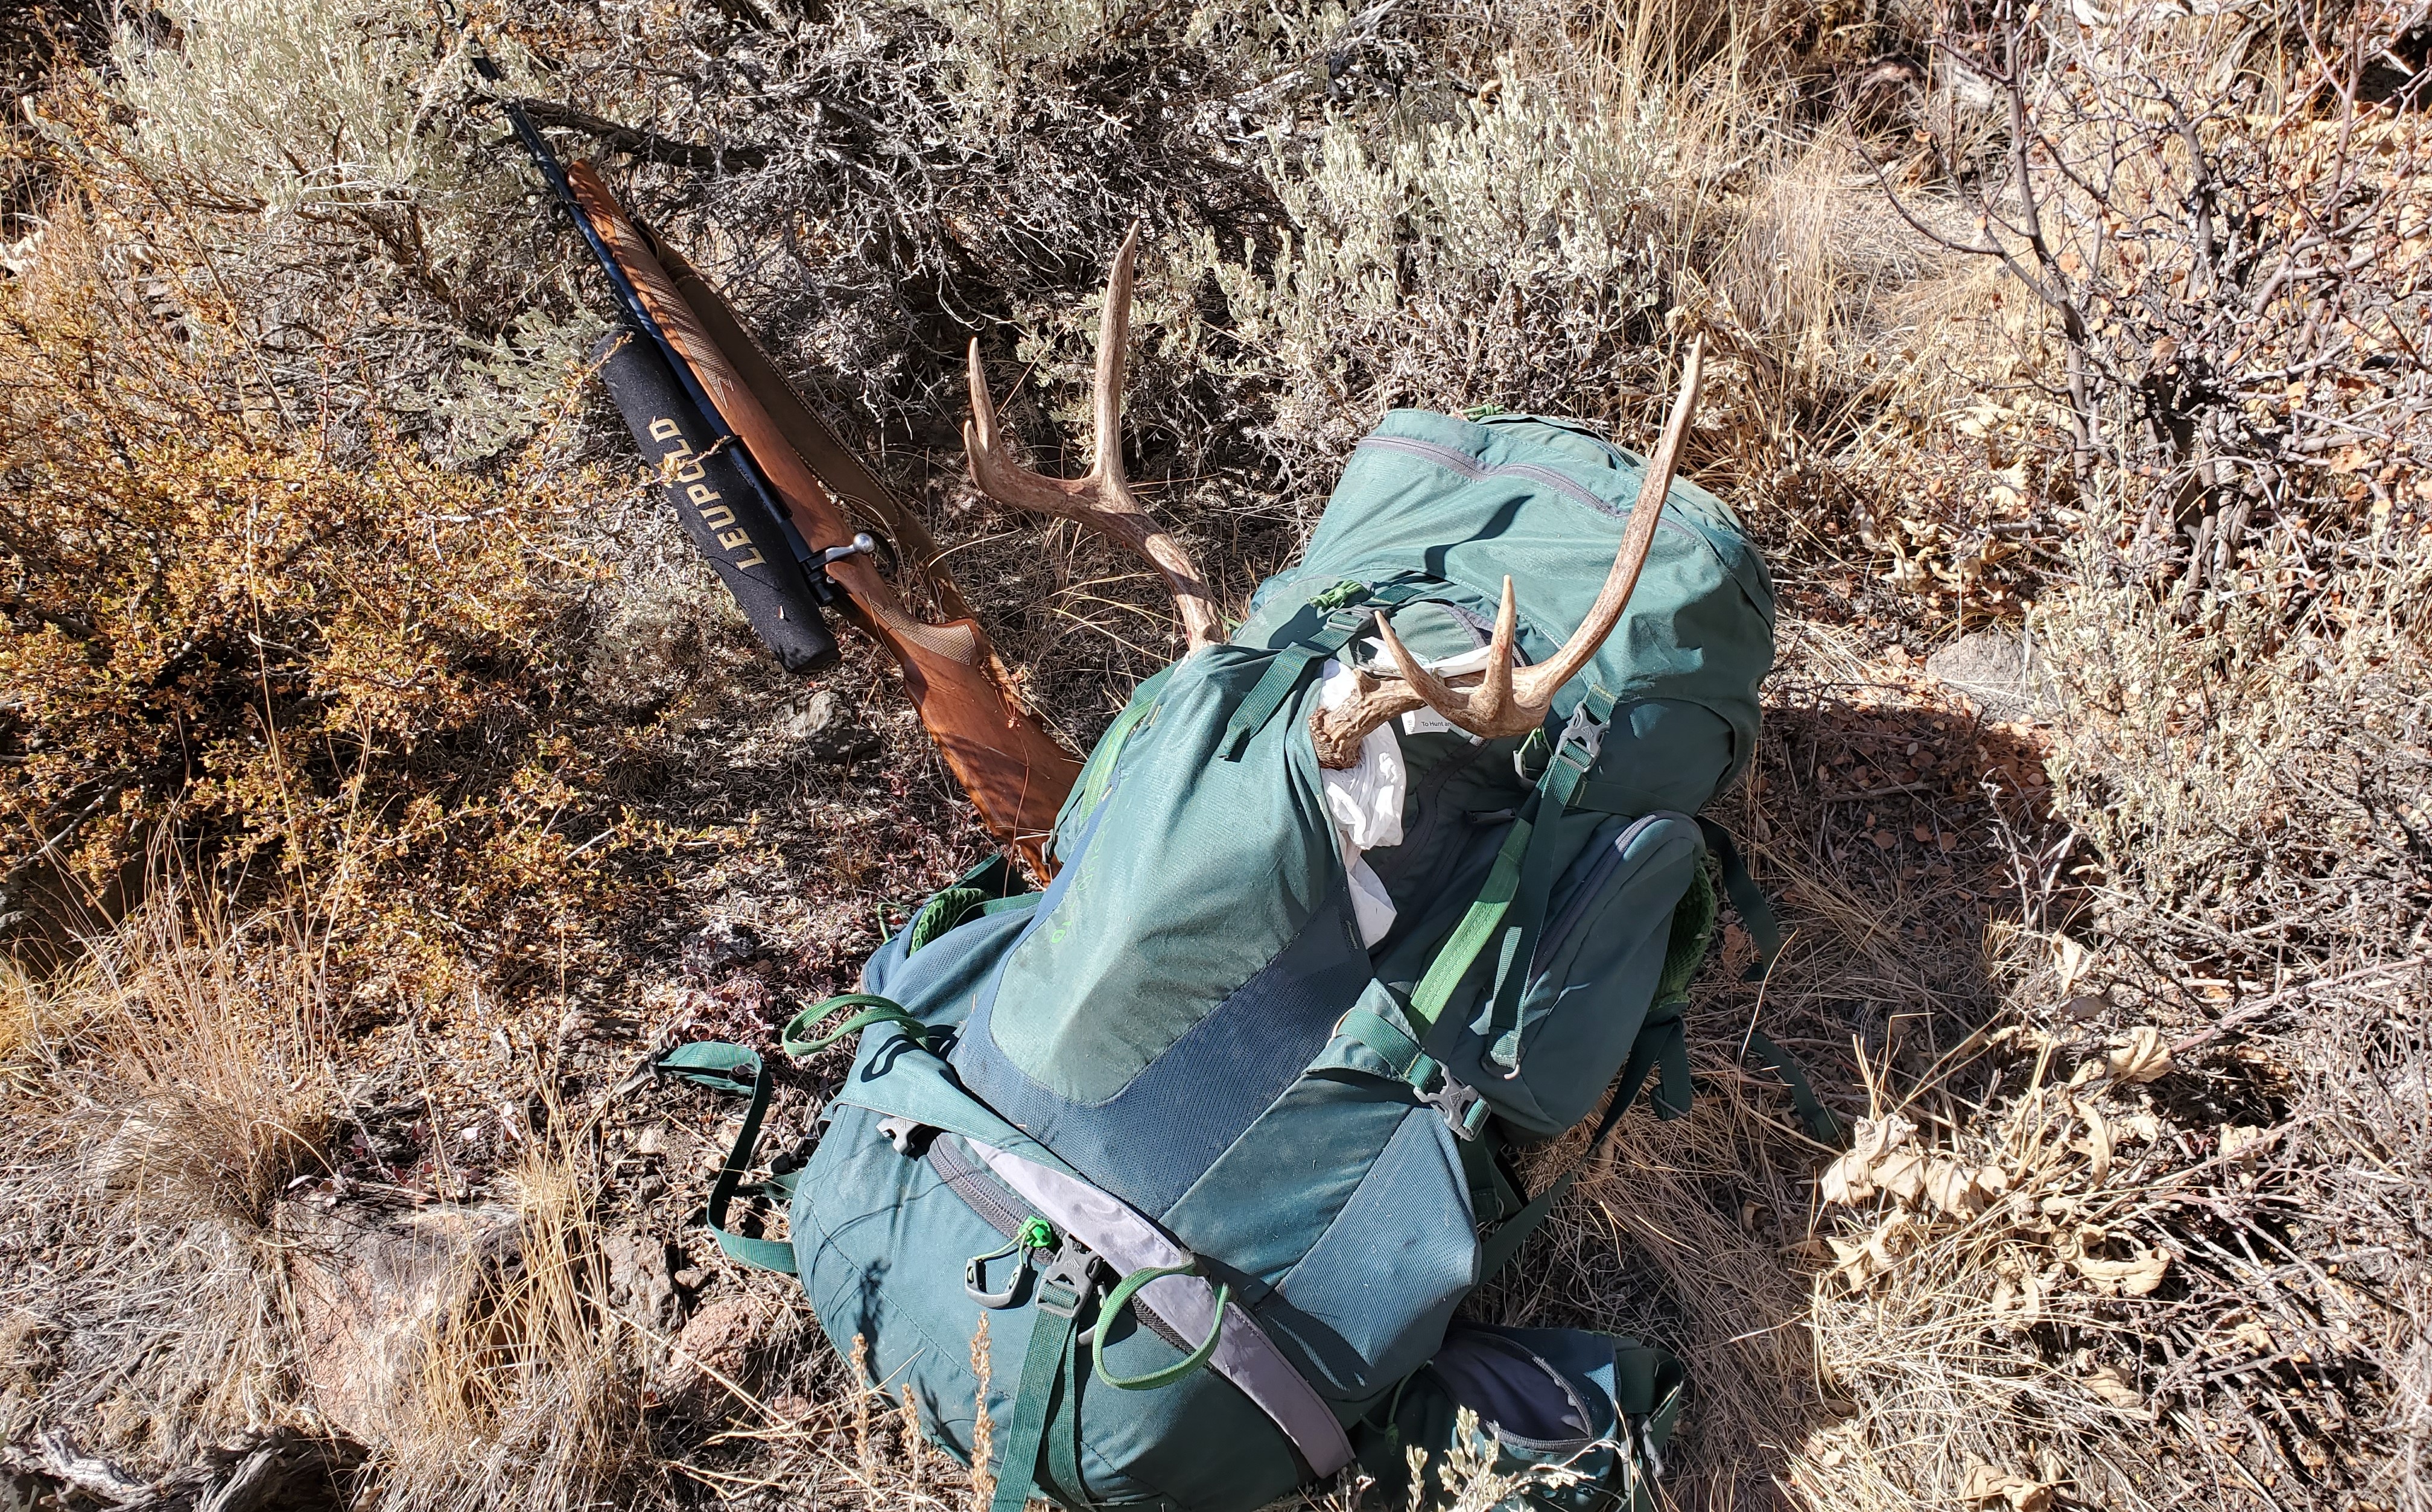 Backpack full of meat with antlers poking out lying next to a sagebrush and a hunting rifle.